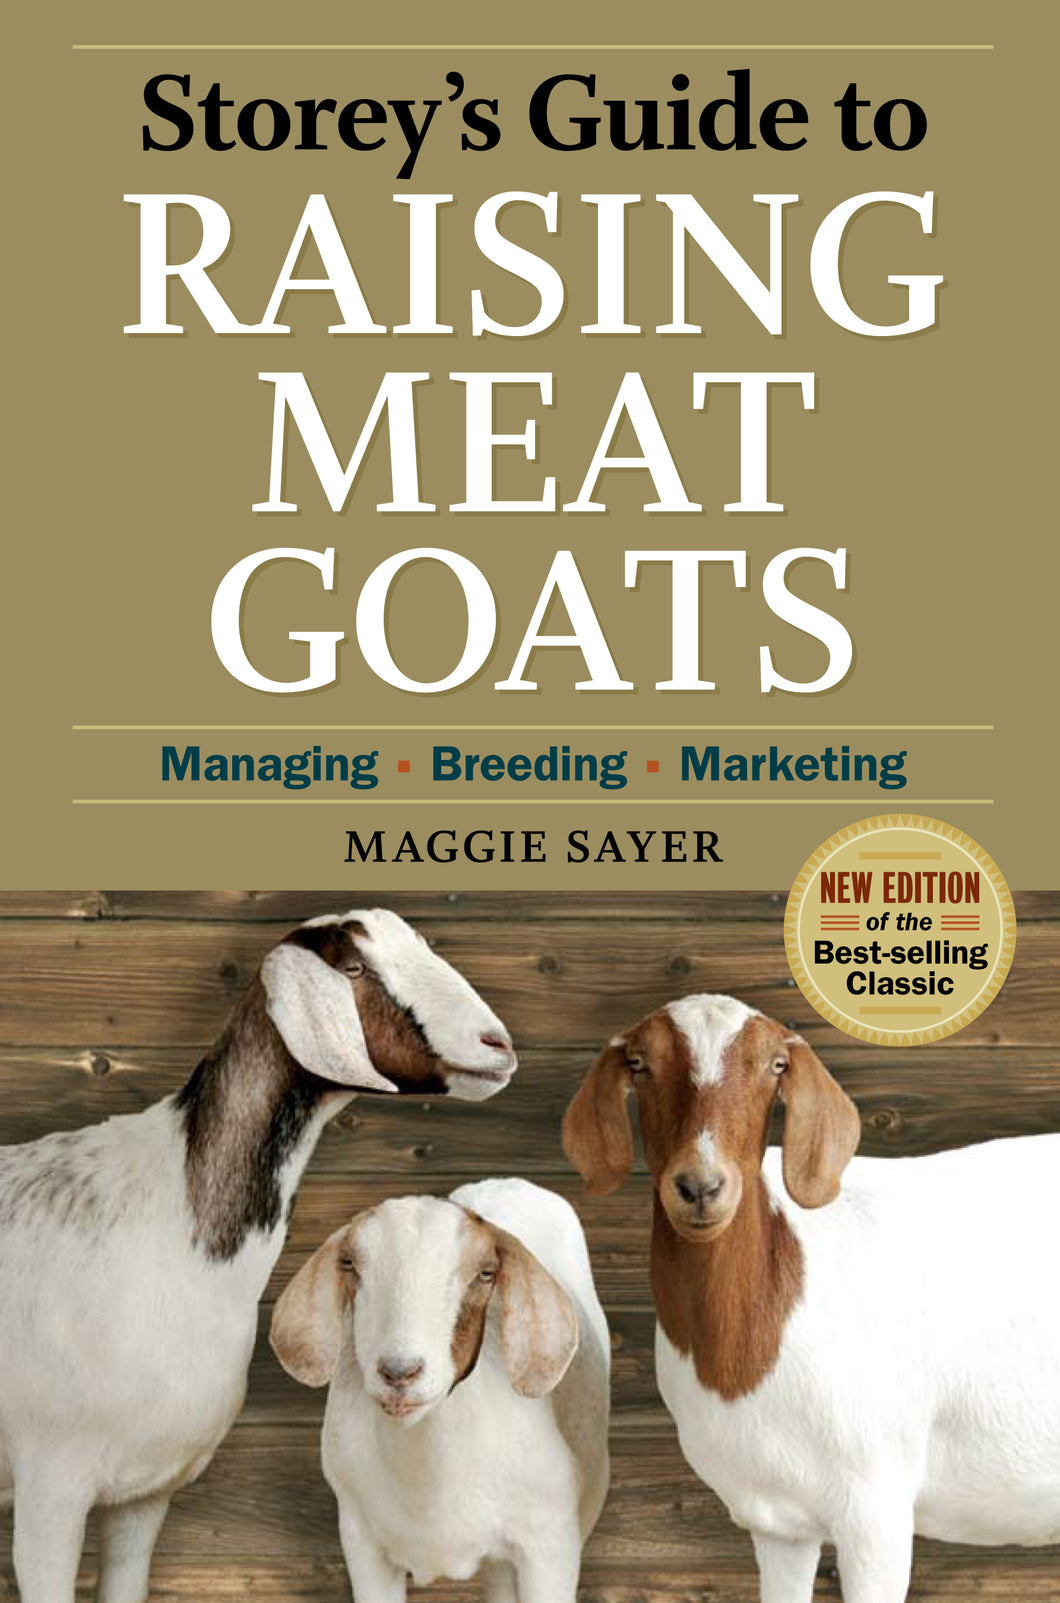 STOREY'S GUIDE TO RAISING MEAT GOATS